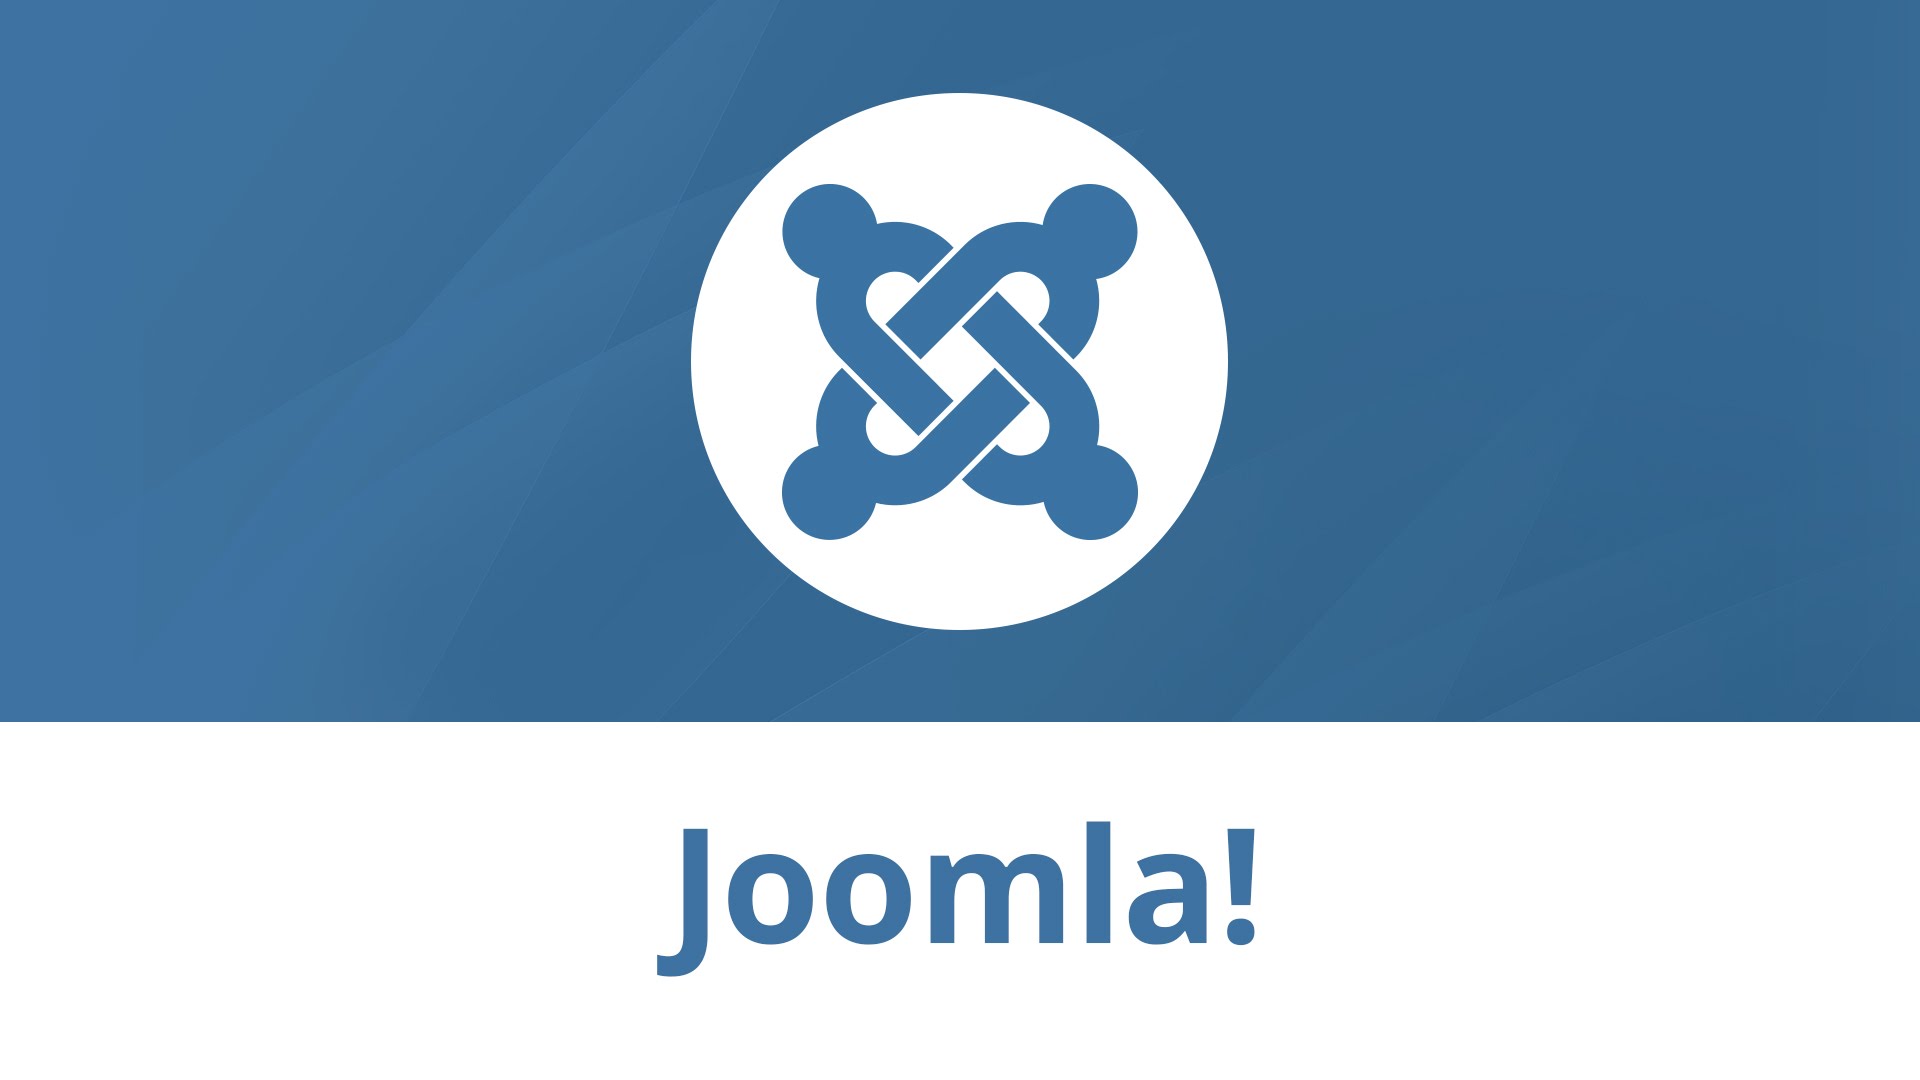 How To Install Joomla With Some Simple Steps